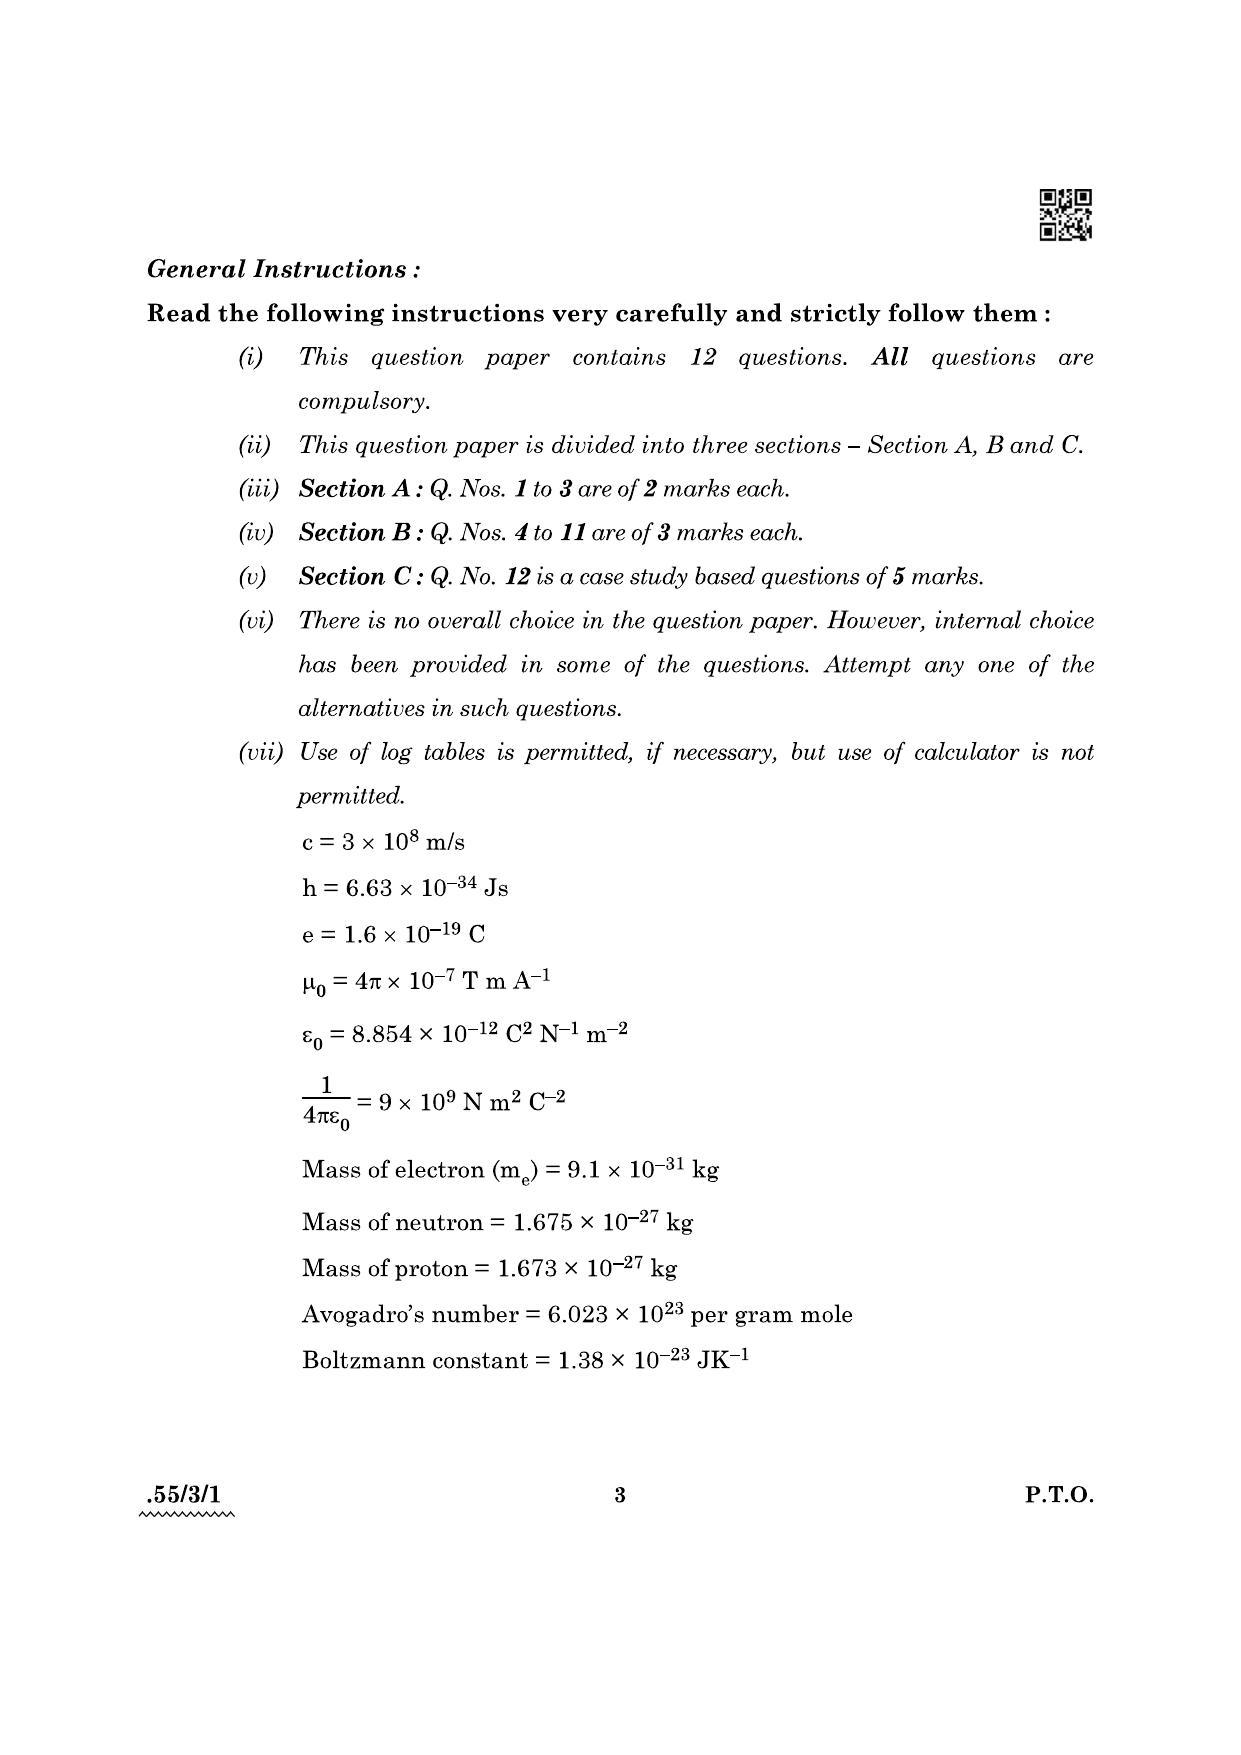 CBSE Class 12 55-3-1 Physics 2022 Question Paper - Page 3